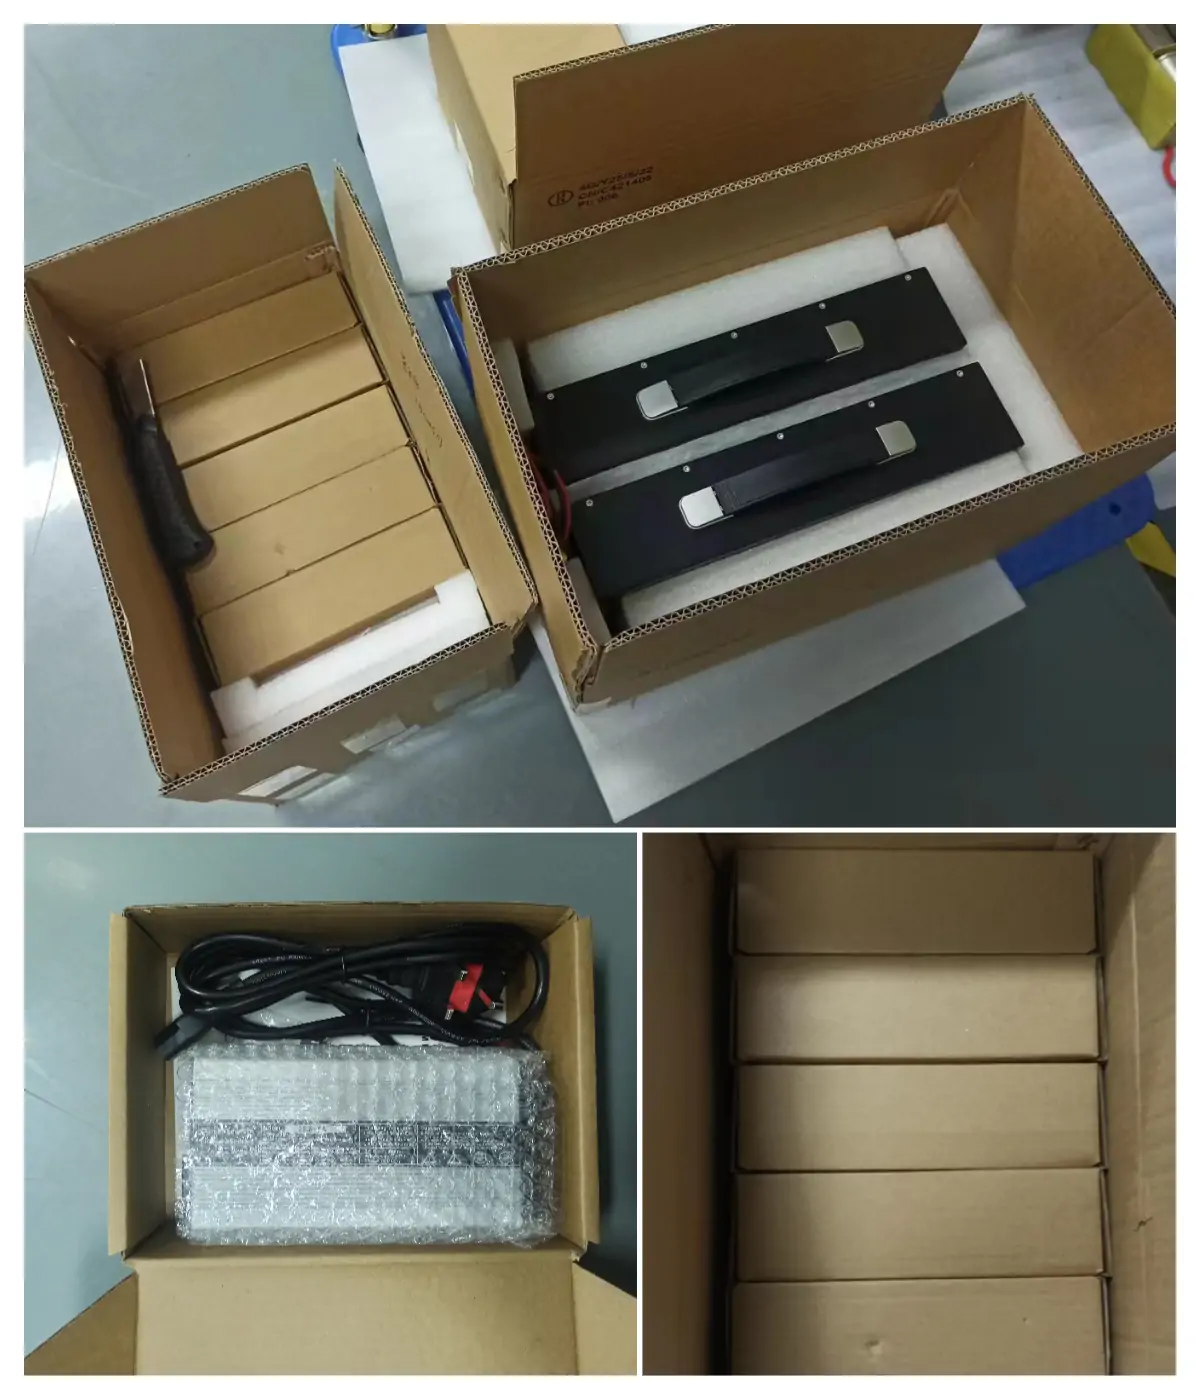 packing details of lifepo4 battery packs